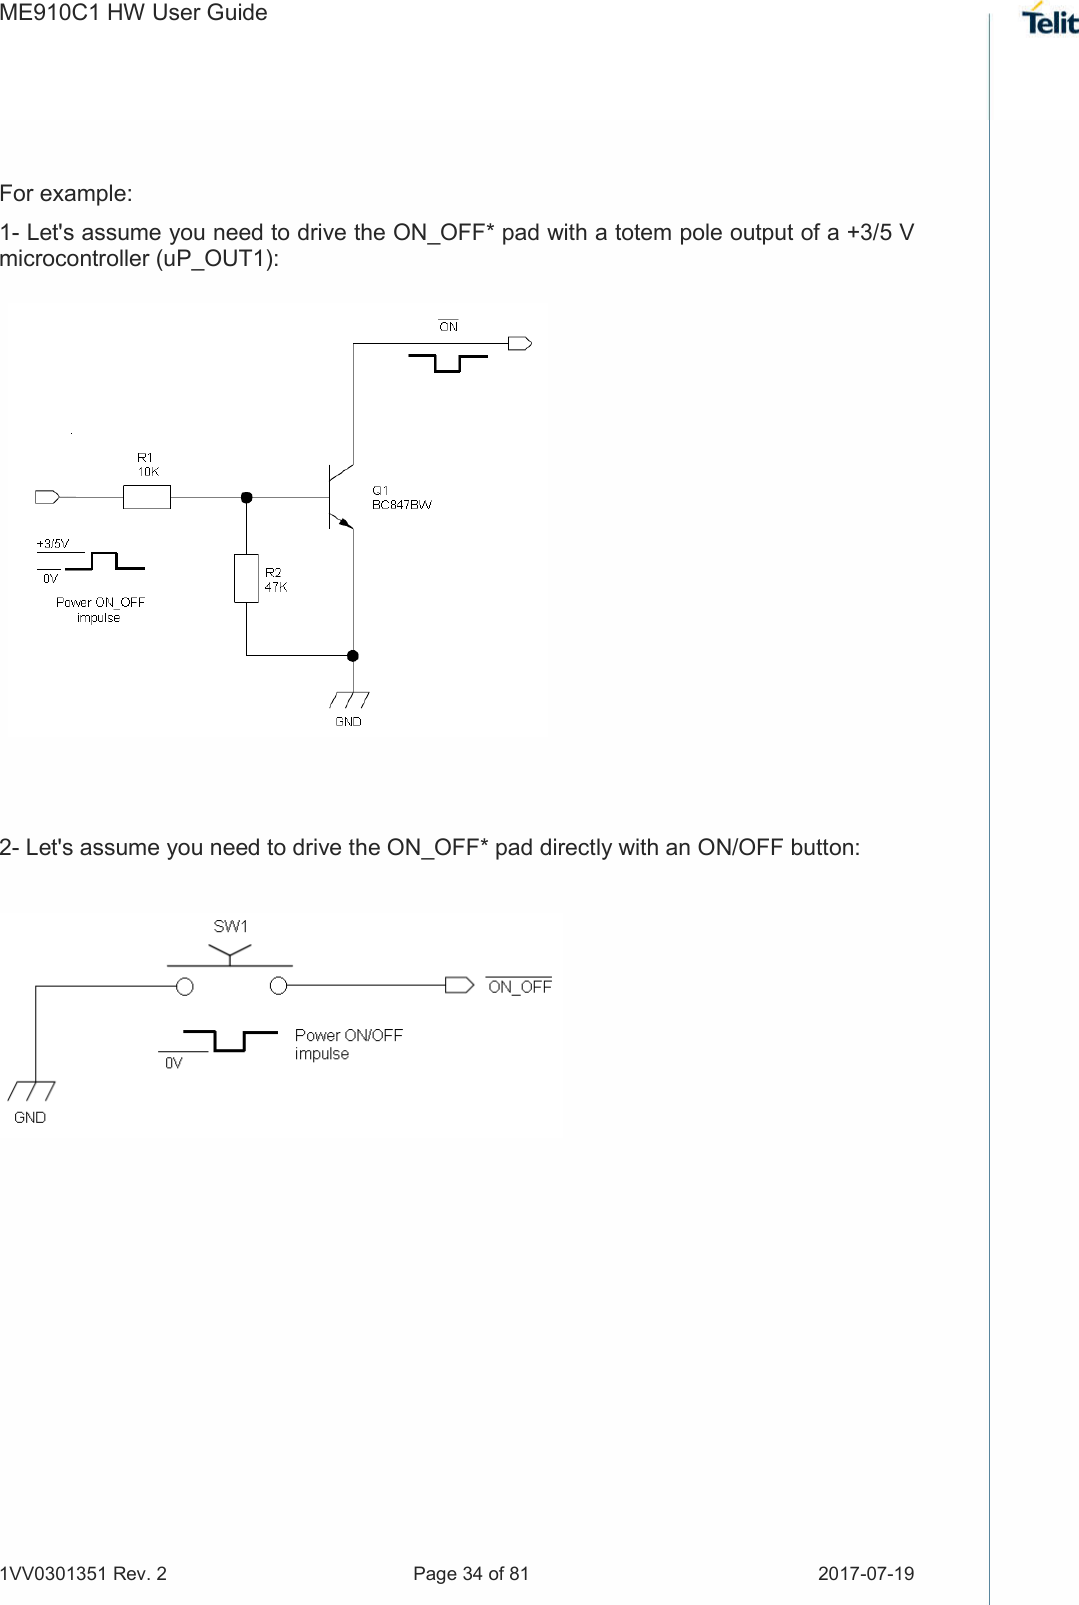 ME910C1 HW User Guide 1VV0301351 Rev. 2  Page 34 of 81  2017-07-19   For example: 1- Let&apos;s assume you need to drive the ON_OFF* pad with a totem pole output of a +3/5 V microcontroller (uP_OUT1):              2- Let&apos;s assume you need to drive the ON_OFF* pad directly with an ON/OFF button:              